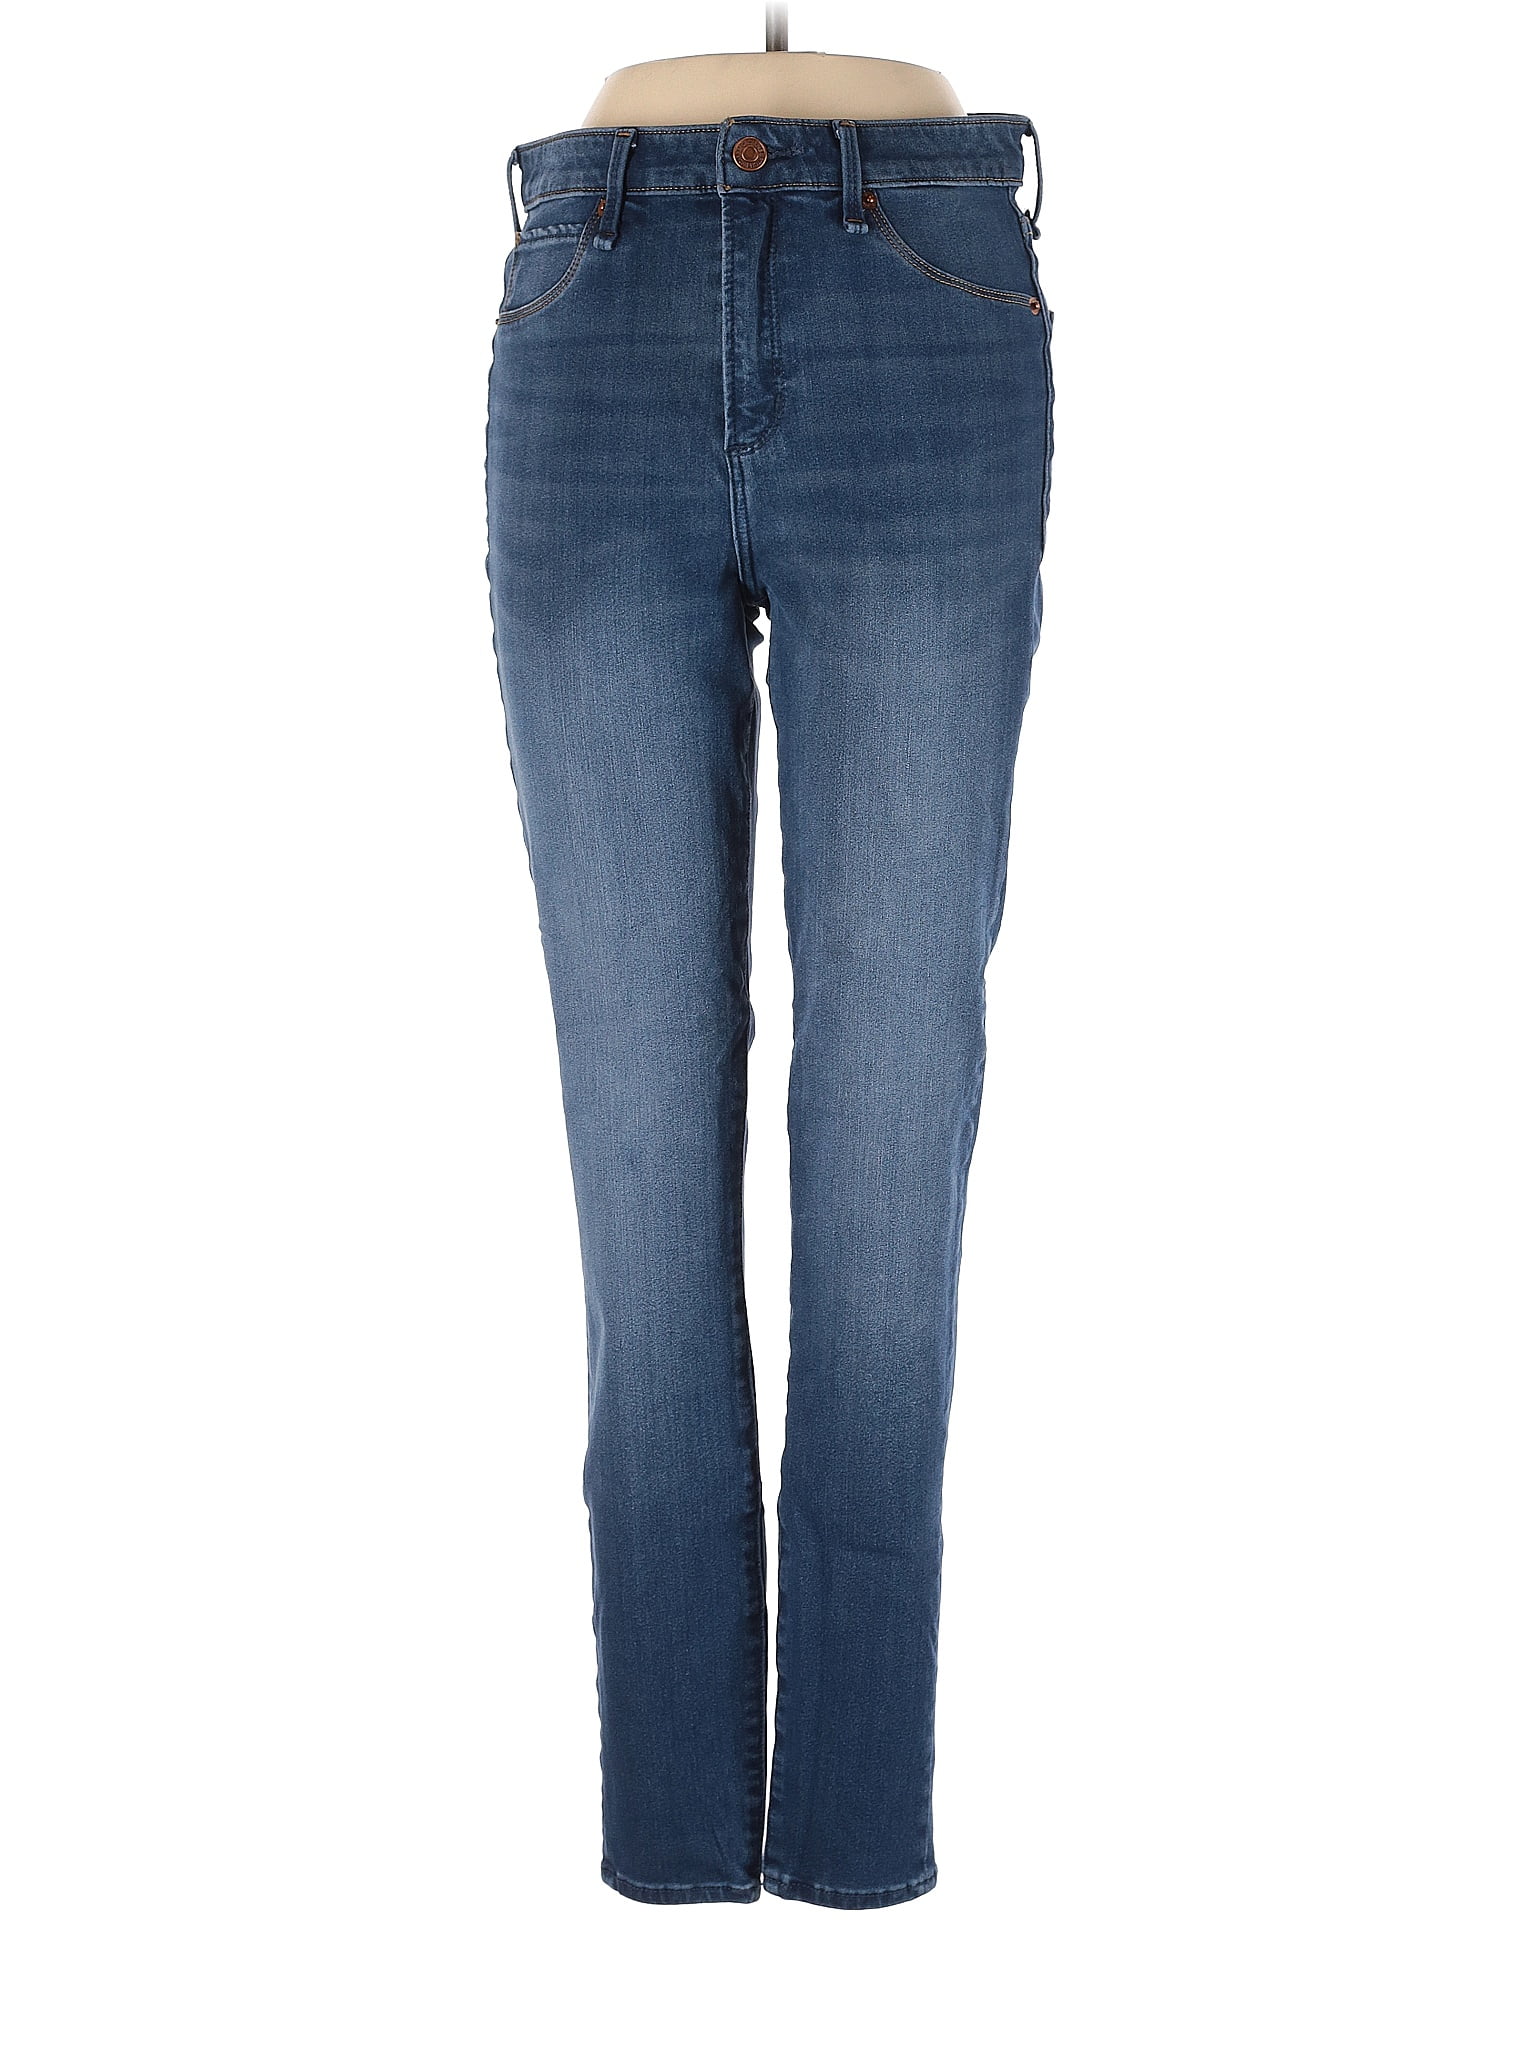 Abercrombie & Fitch Solid Blue Jeans Size 4 - 72% off | thredUP